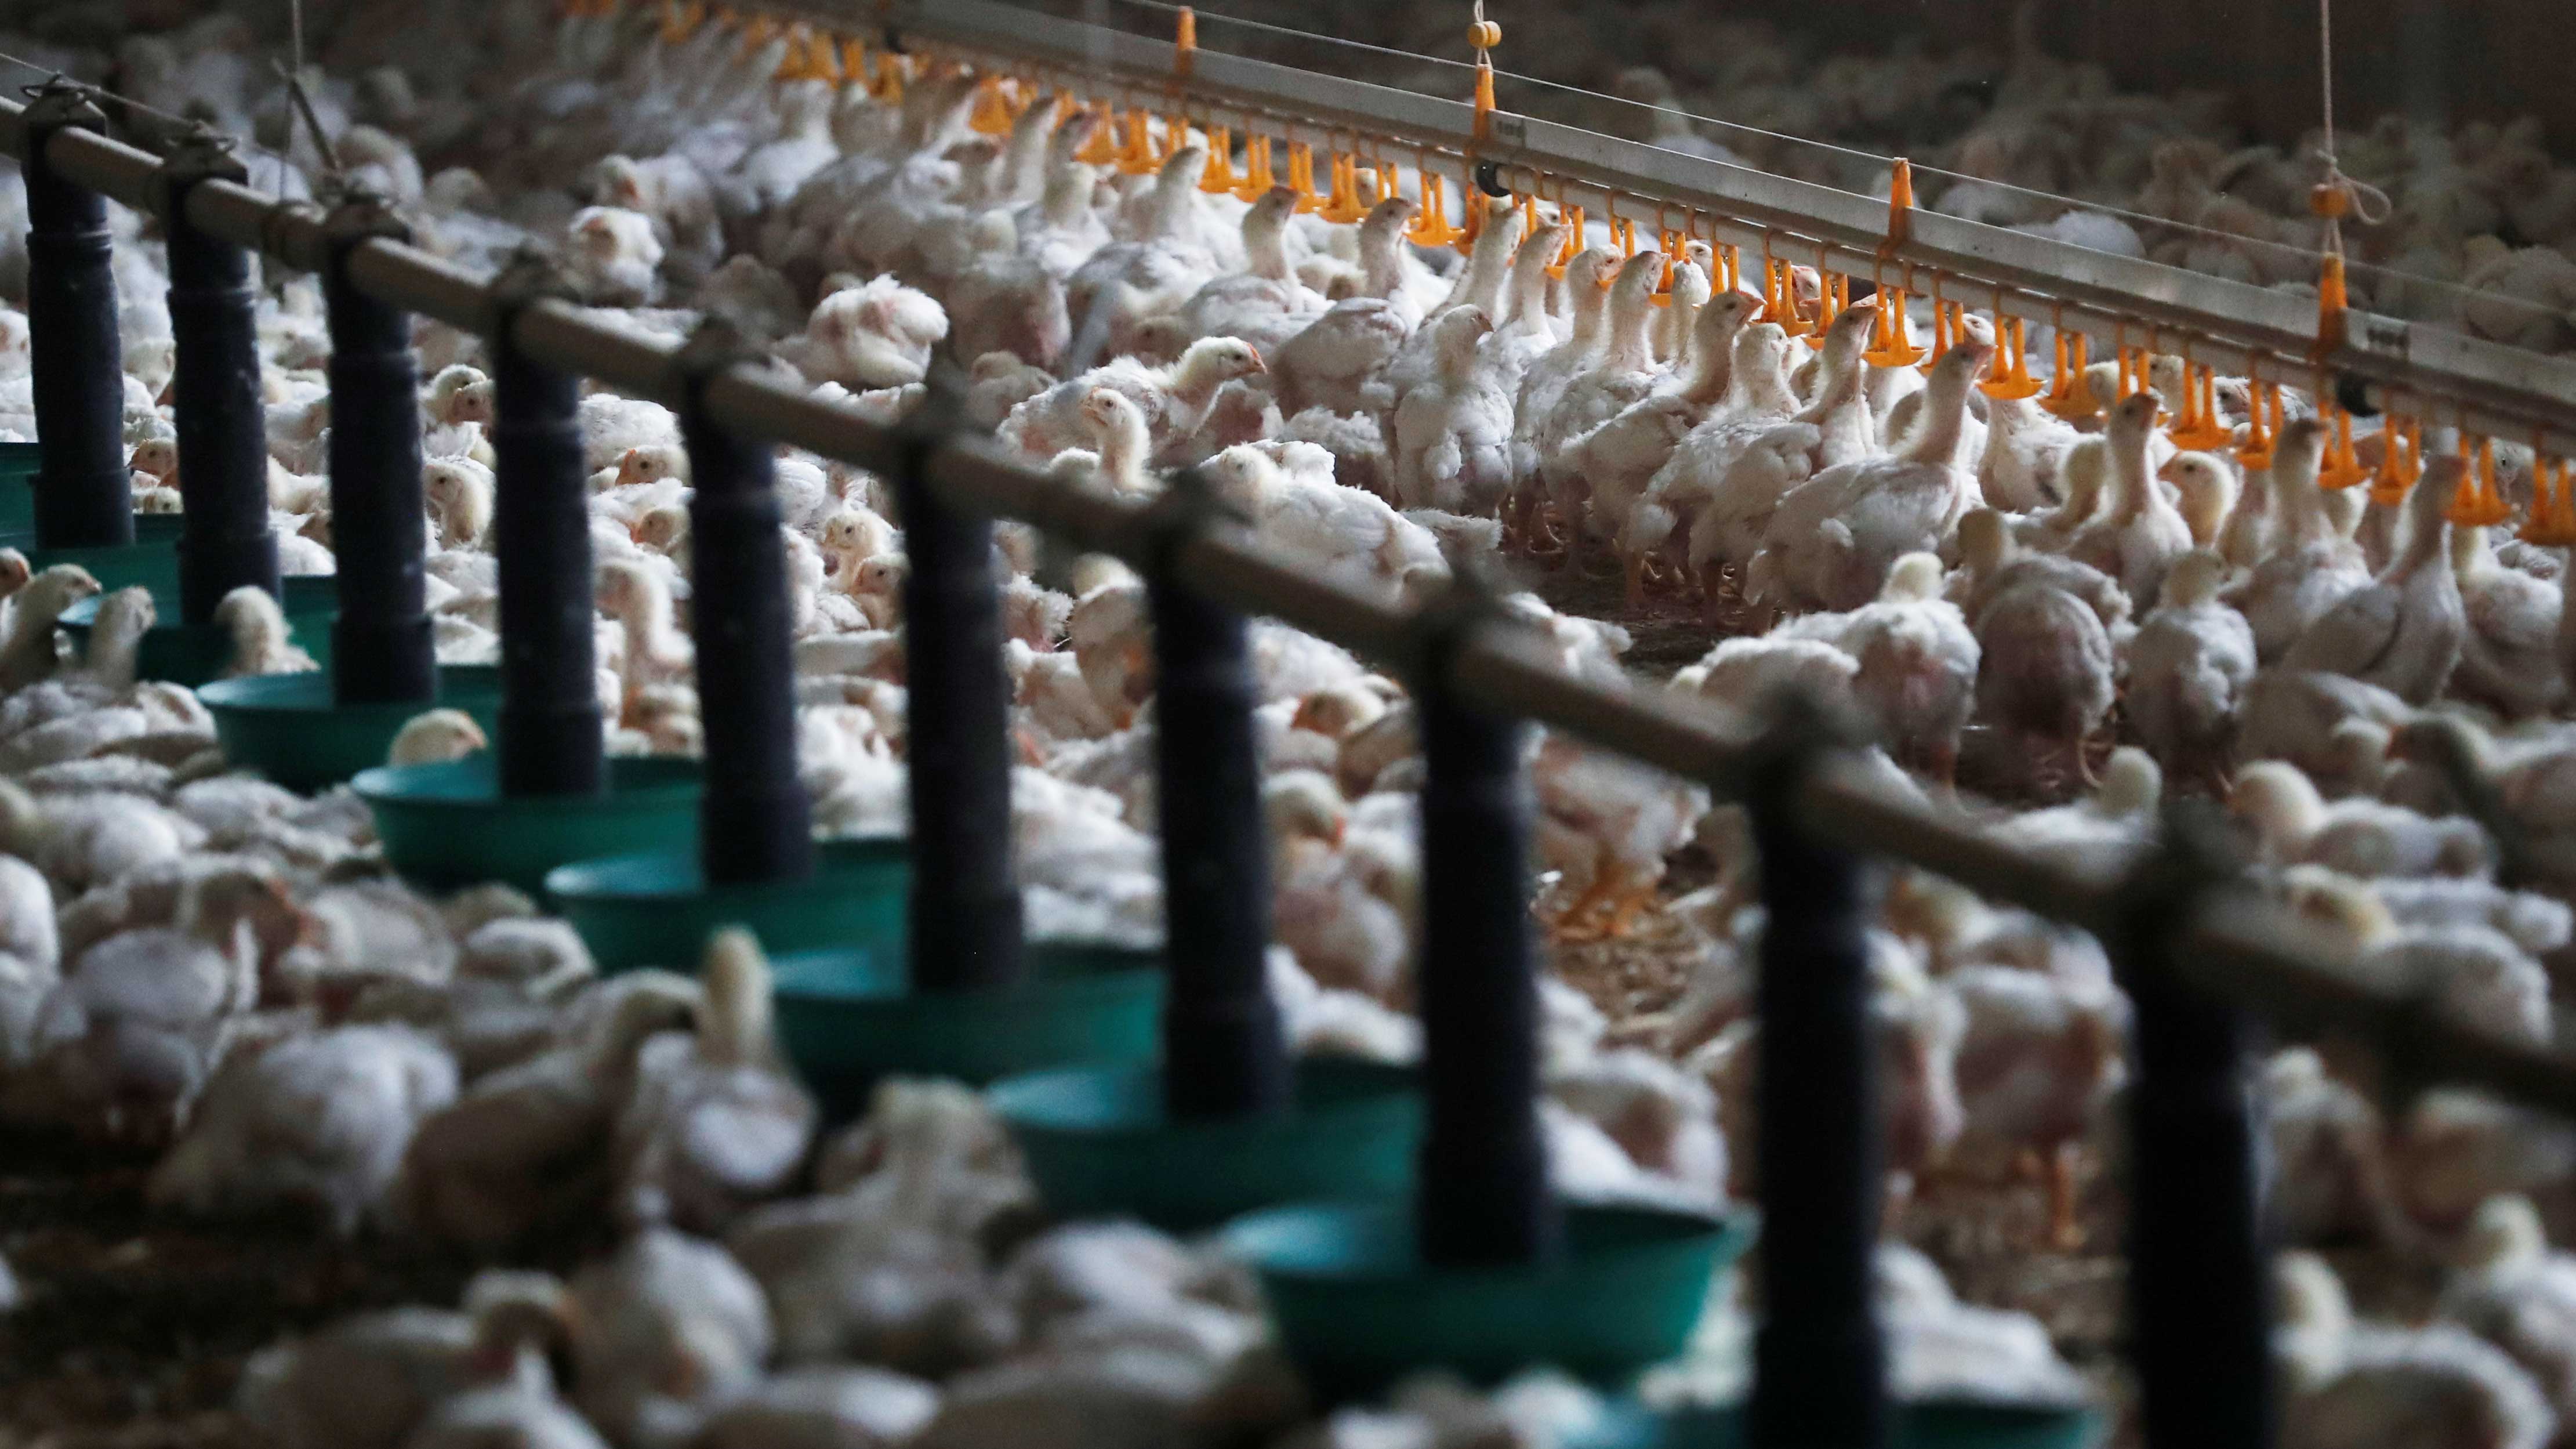 Europe sees worst bird flu outbreak in its history this year Fox News